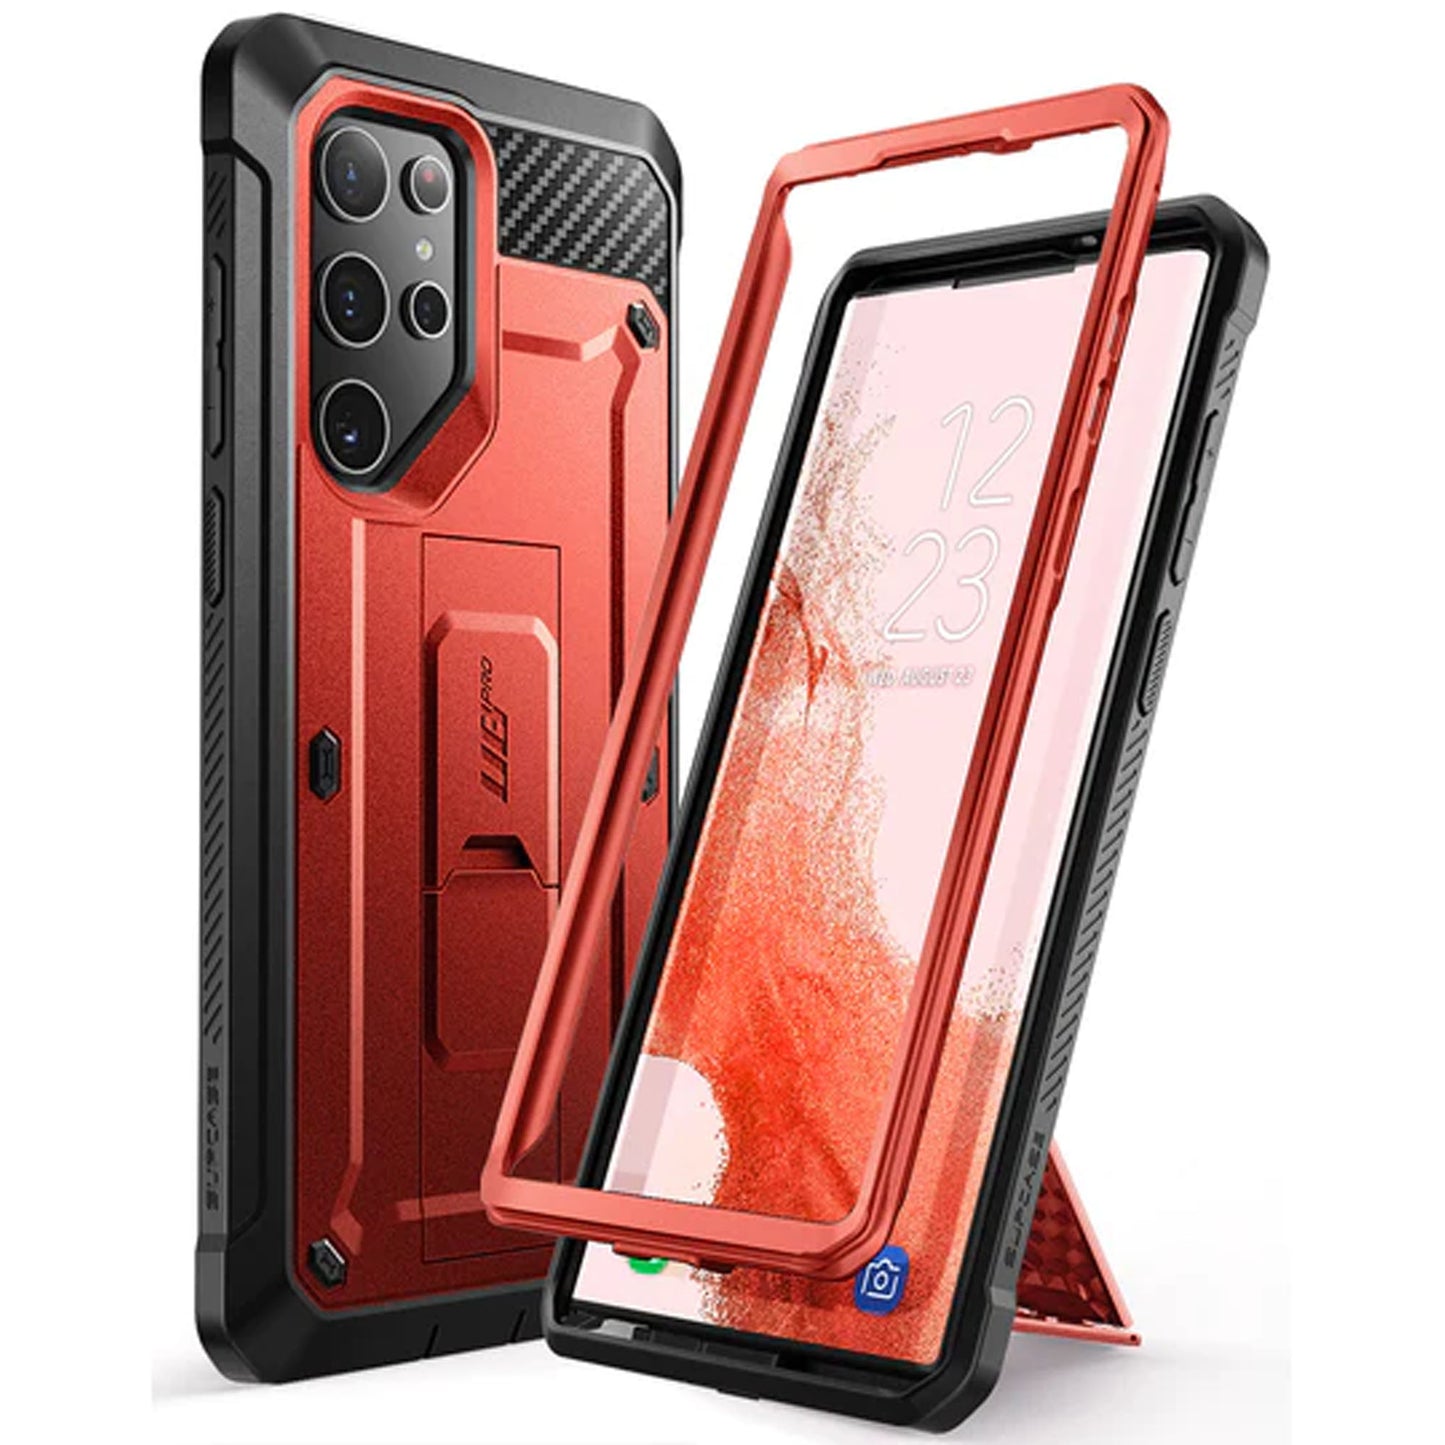 Supcase Unicorn Beetle Pro Rugged Case for Samsung Galaxy S22 Ultra - Metallic Red